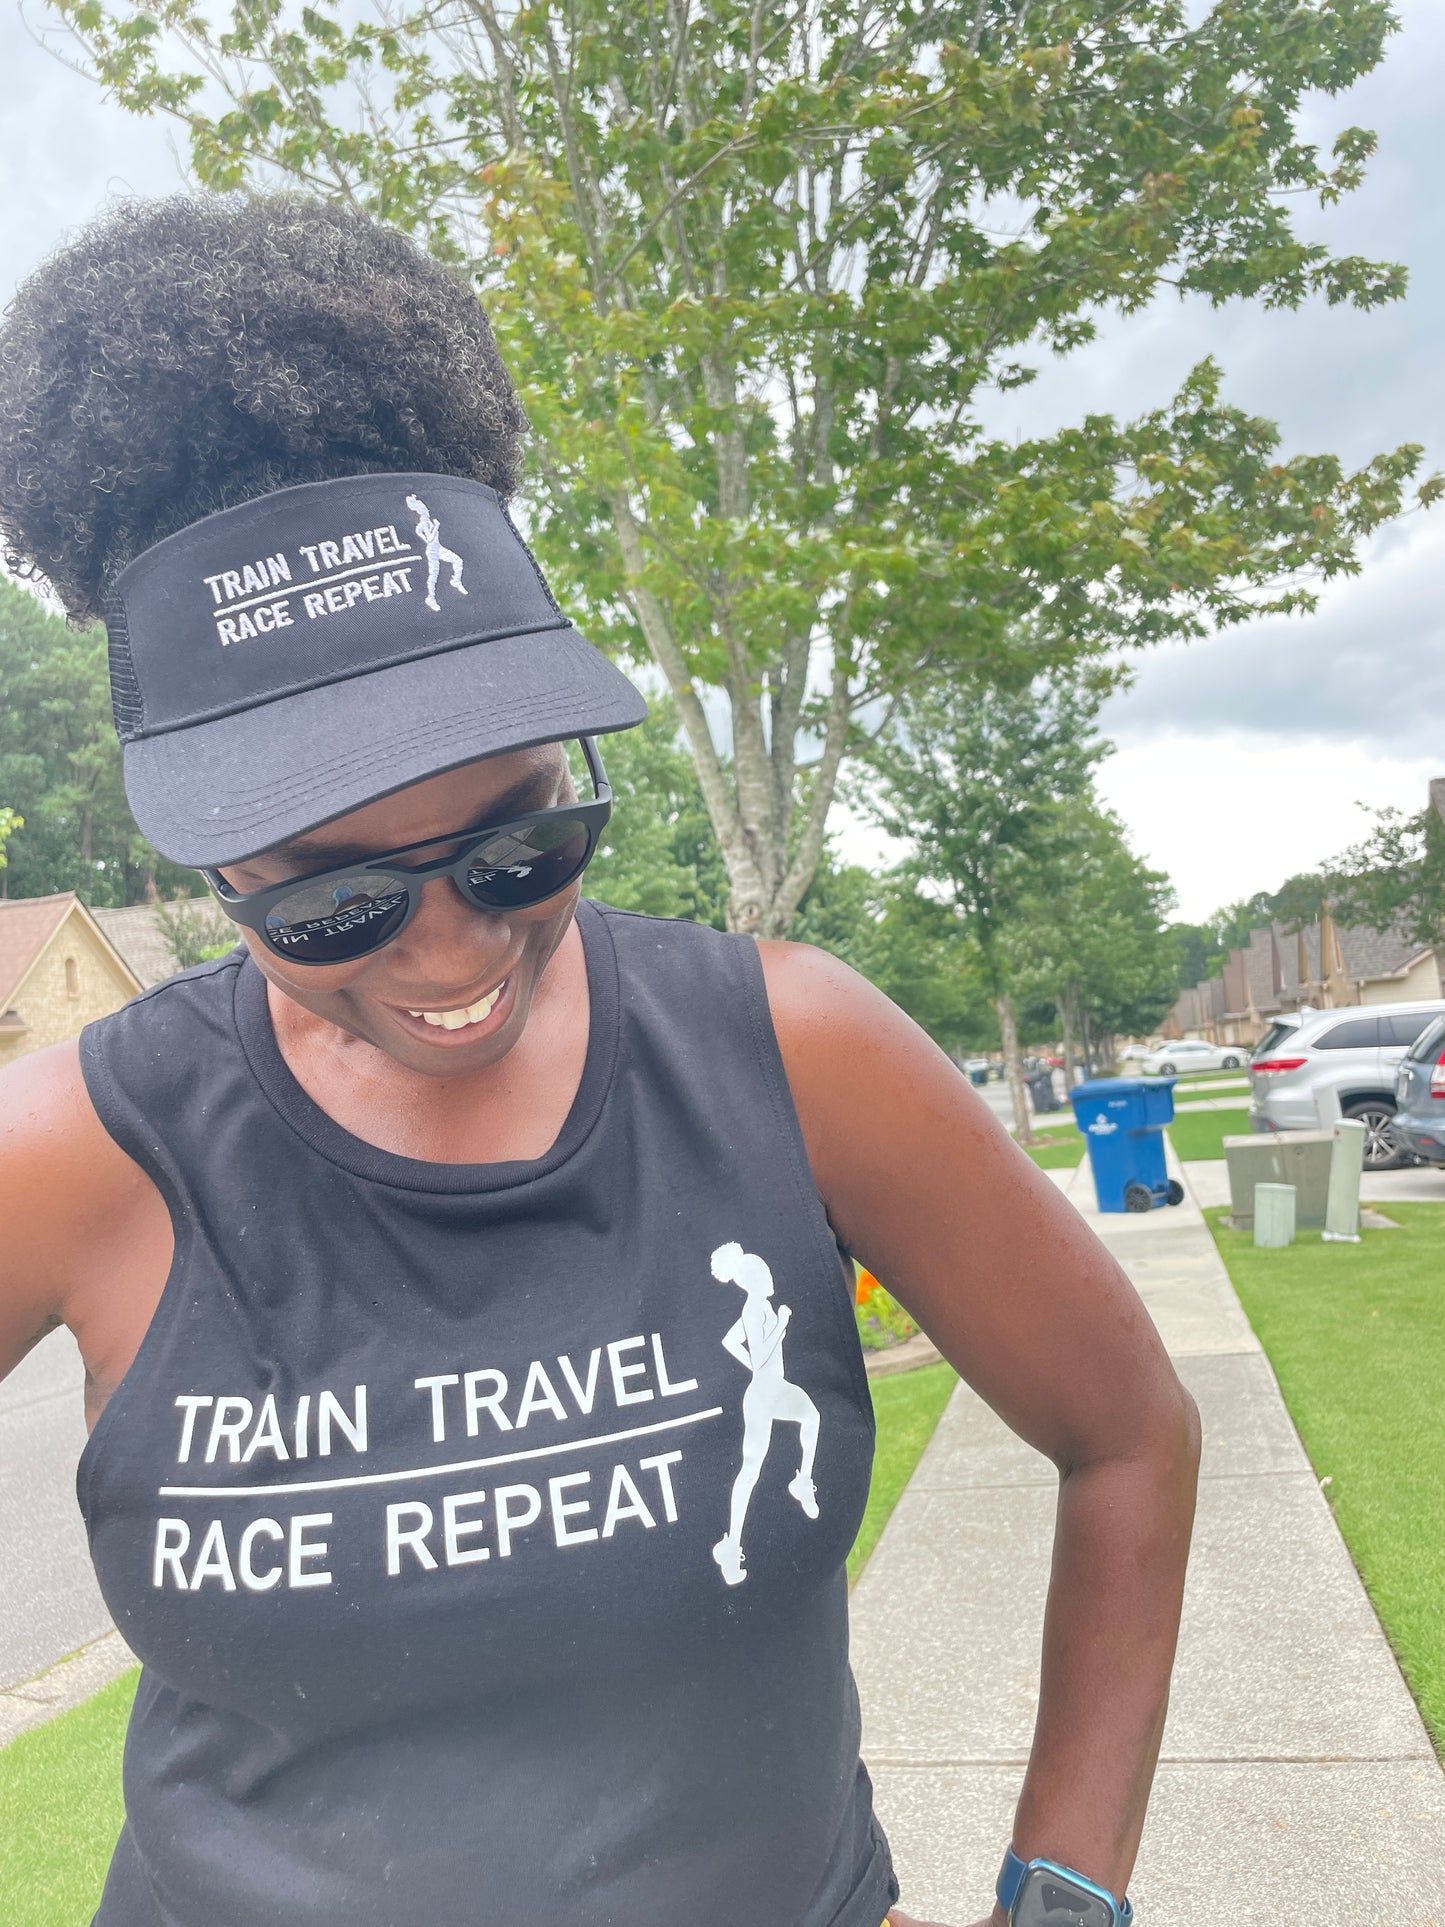 Train Travel Race Repeat  Muscle Tank - The Race